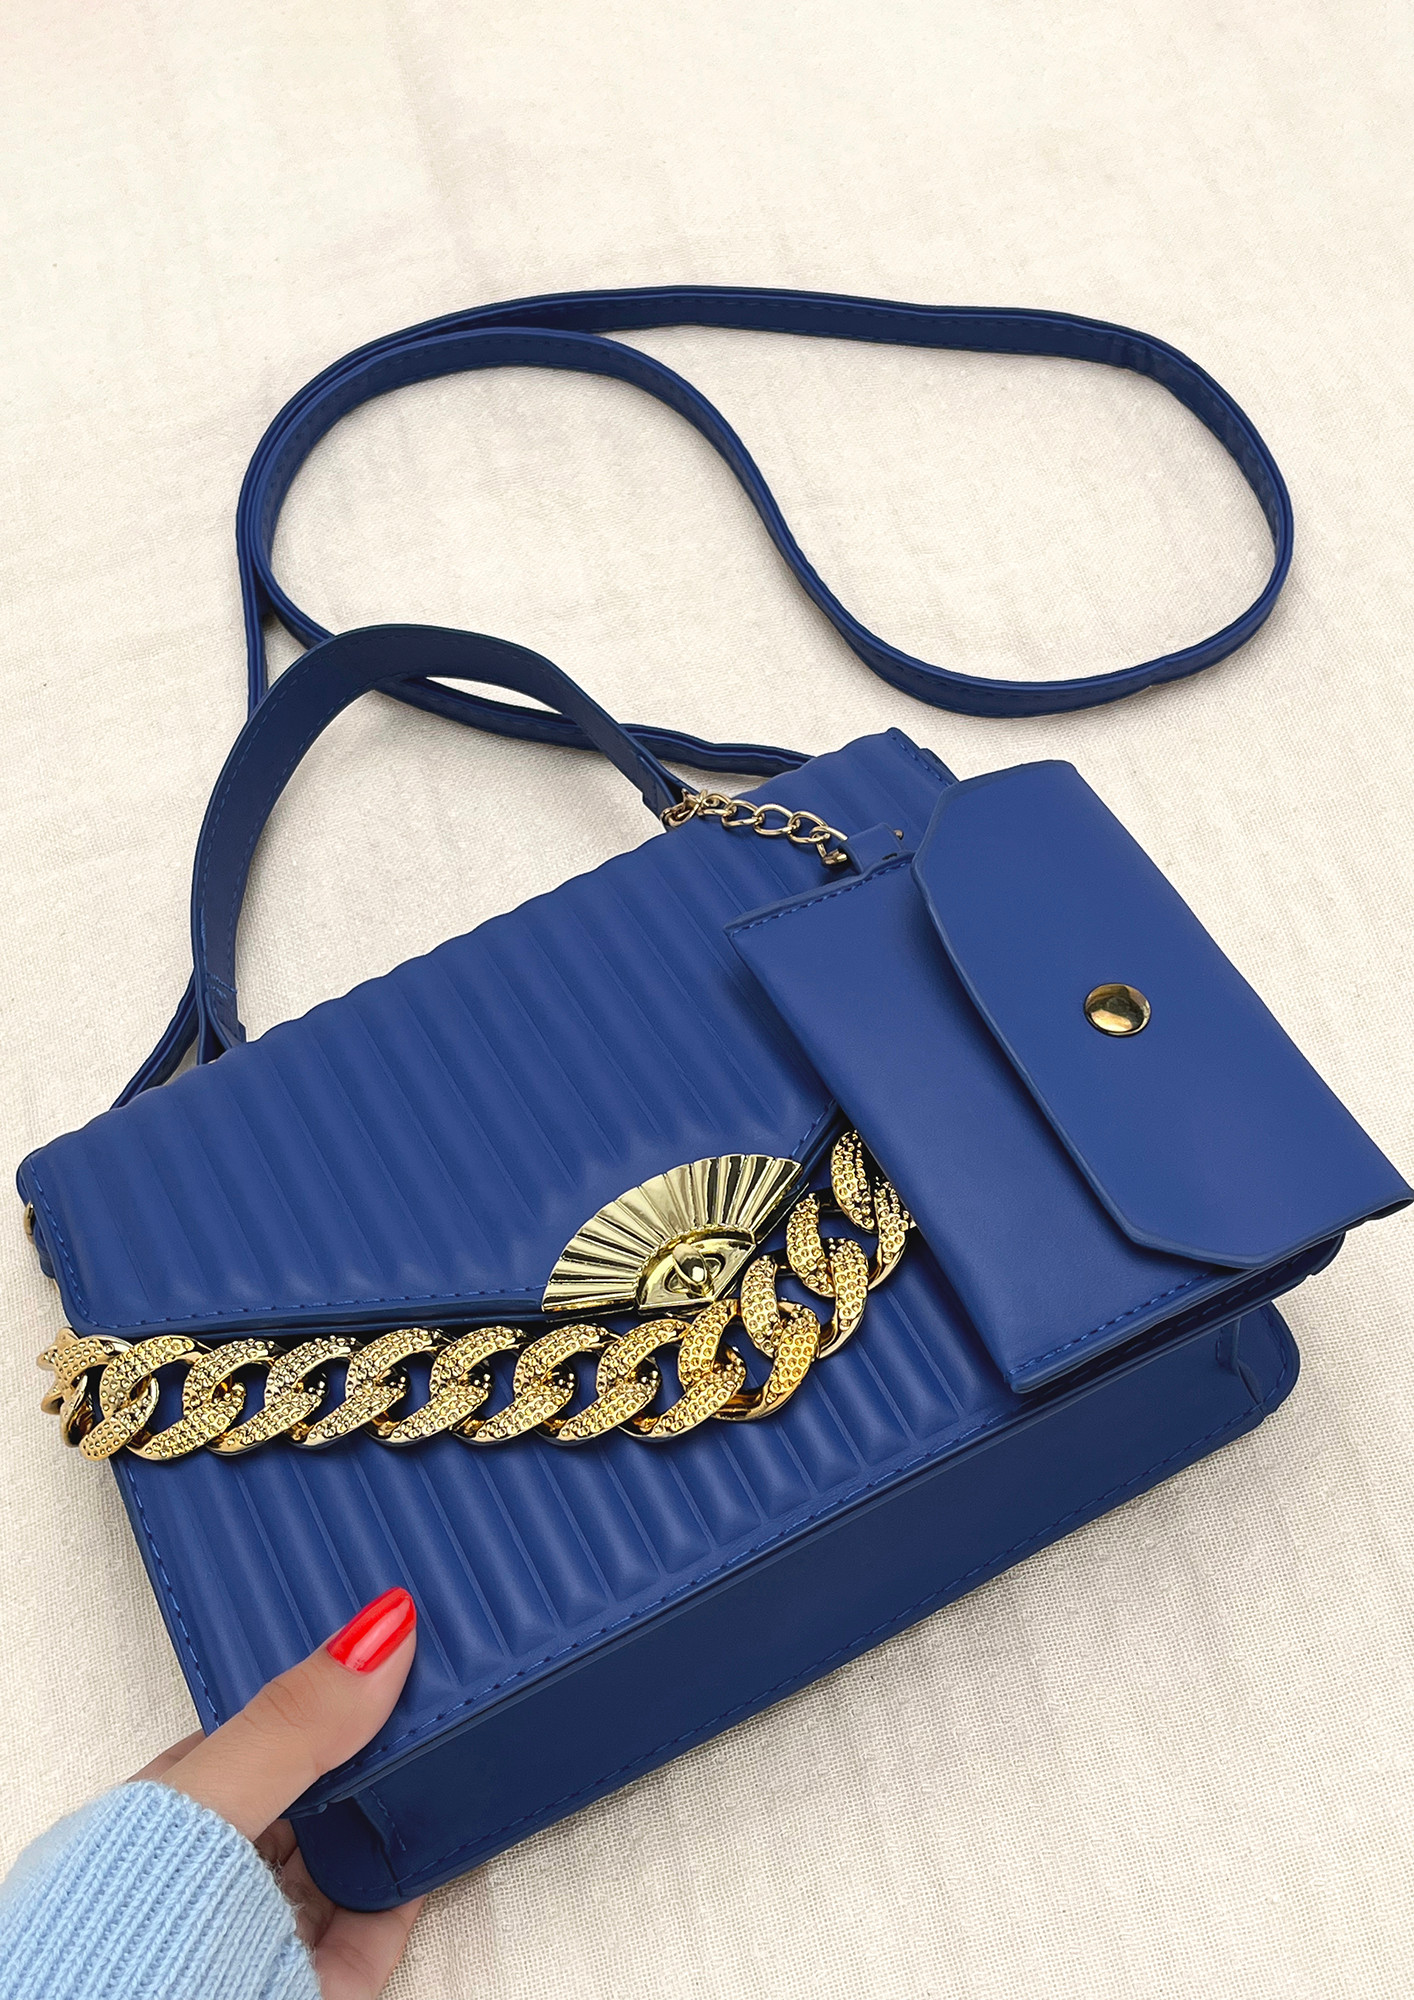 TOP HANDLE QUILTED SQUARE BLUE HANDBAG